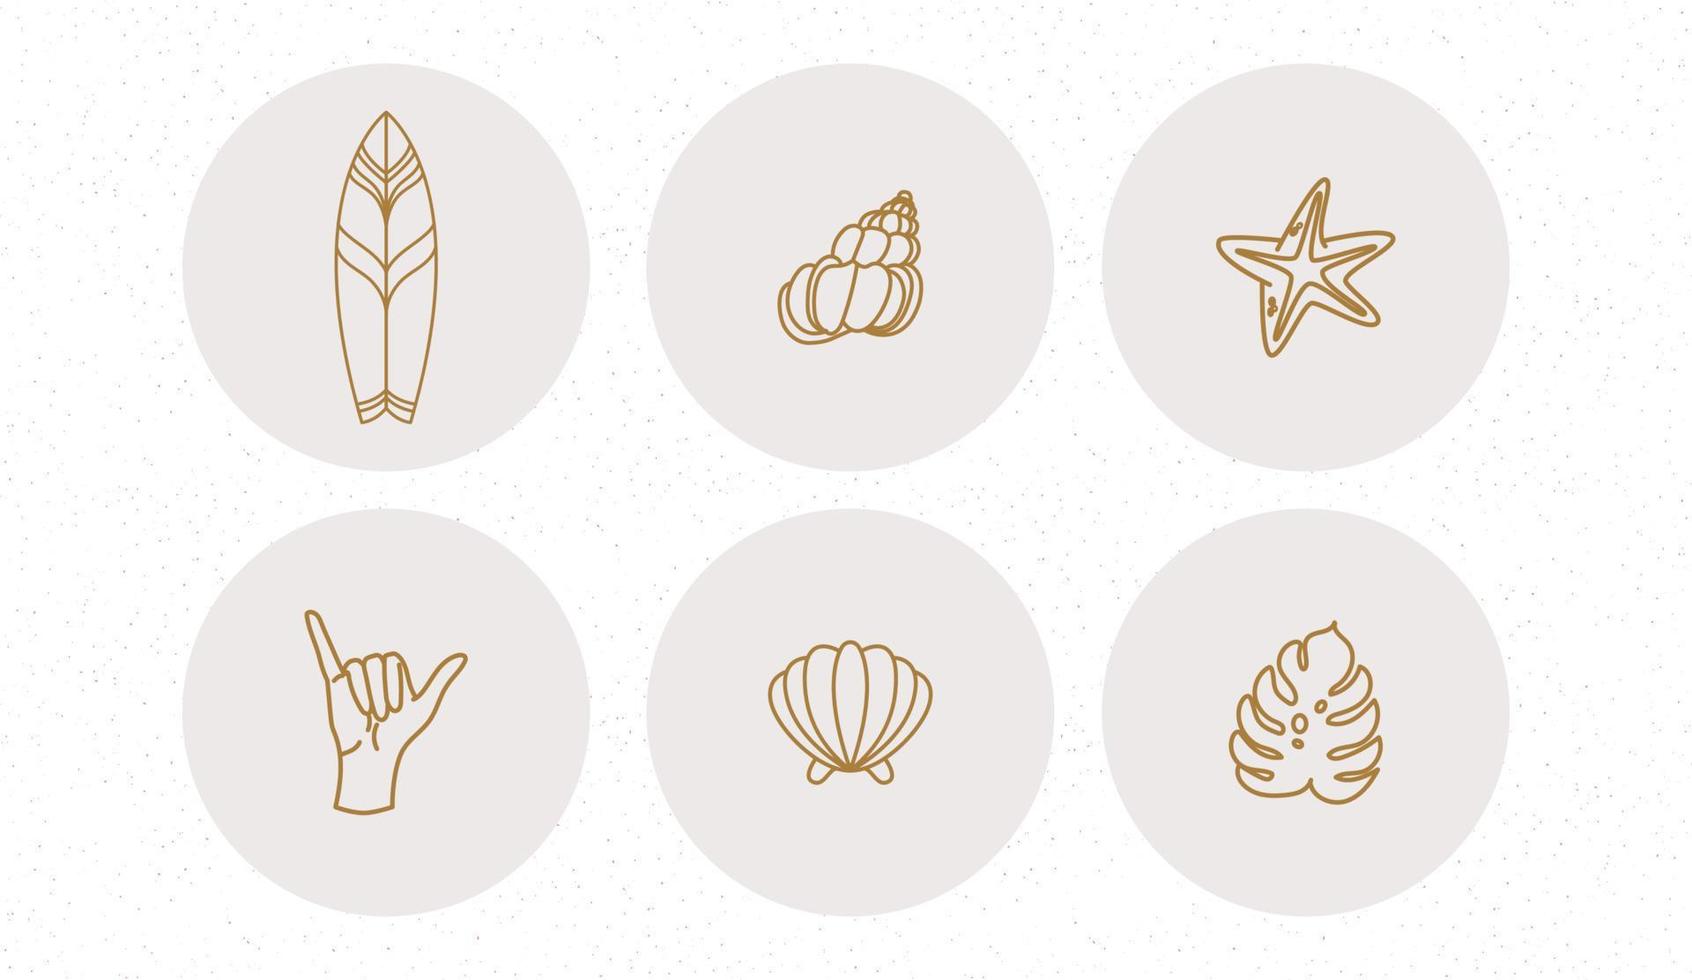 Summer badges with clockwork seashells, flowers and hands in circles. Vector illustration. Set of icons and emblems for social media news covers. Design templates for yoga studio, tourism